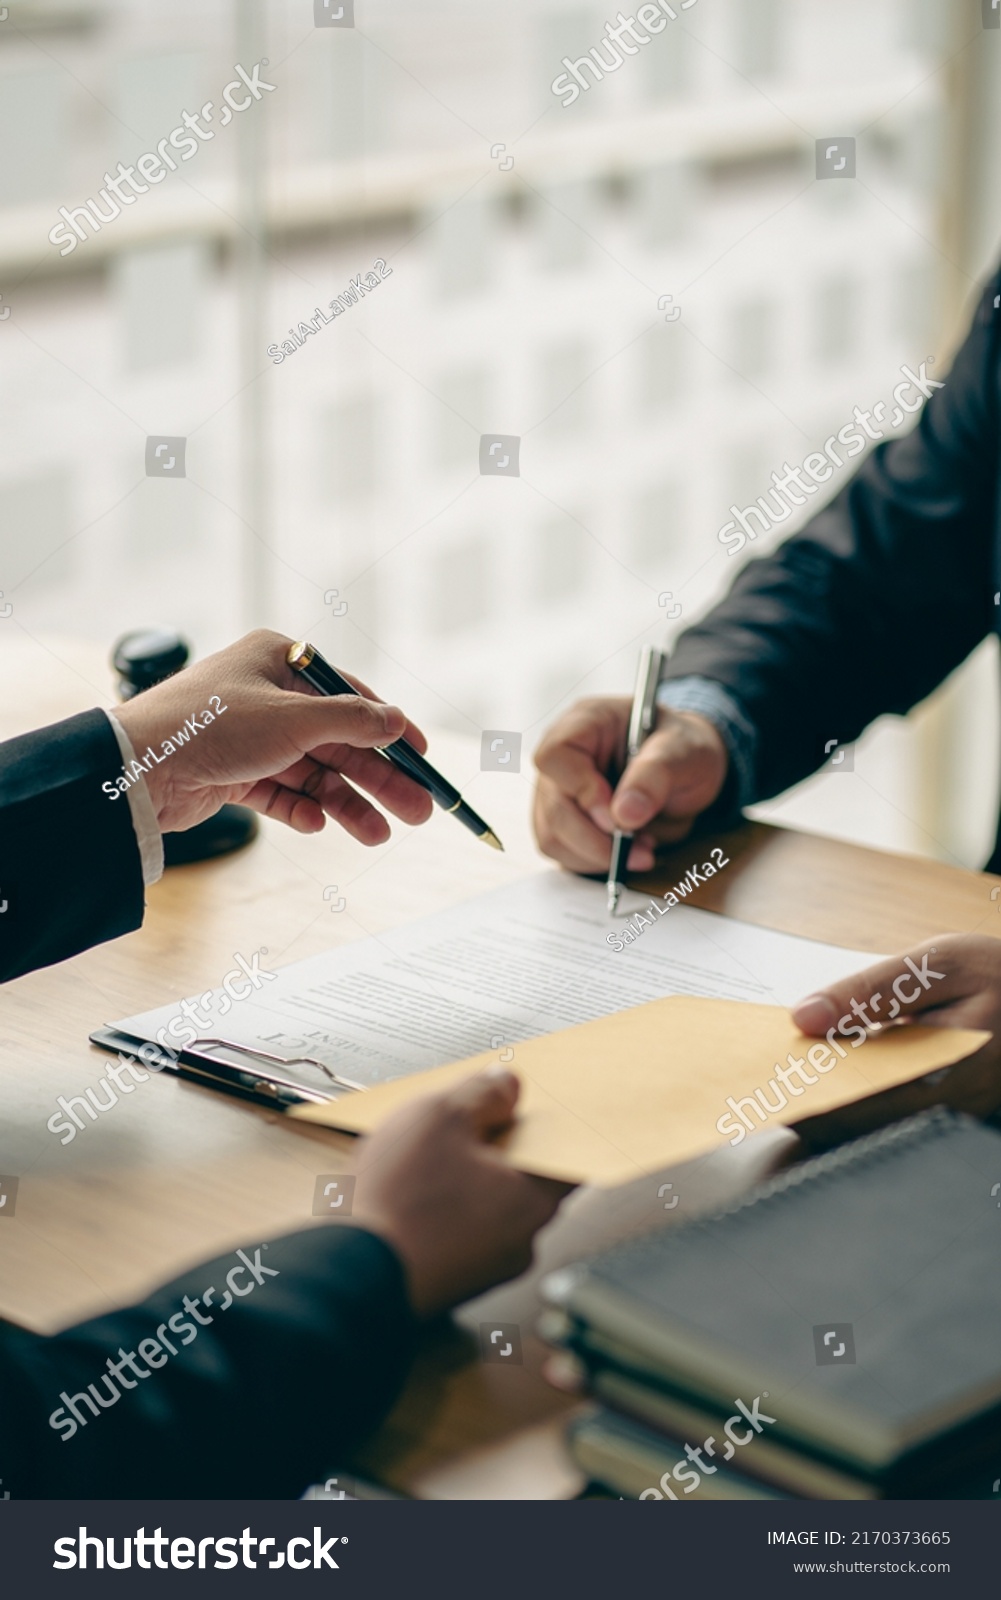 Business people or lawyers discussing contracts or business deals at a law firm. Justice advice service concept with hammer and goddess of justice beside, vertical image. #2170373665